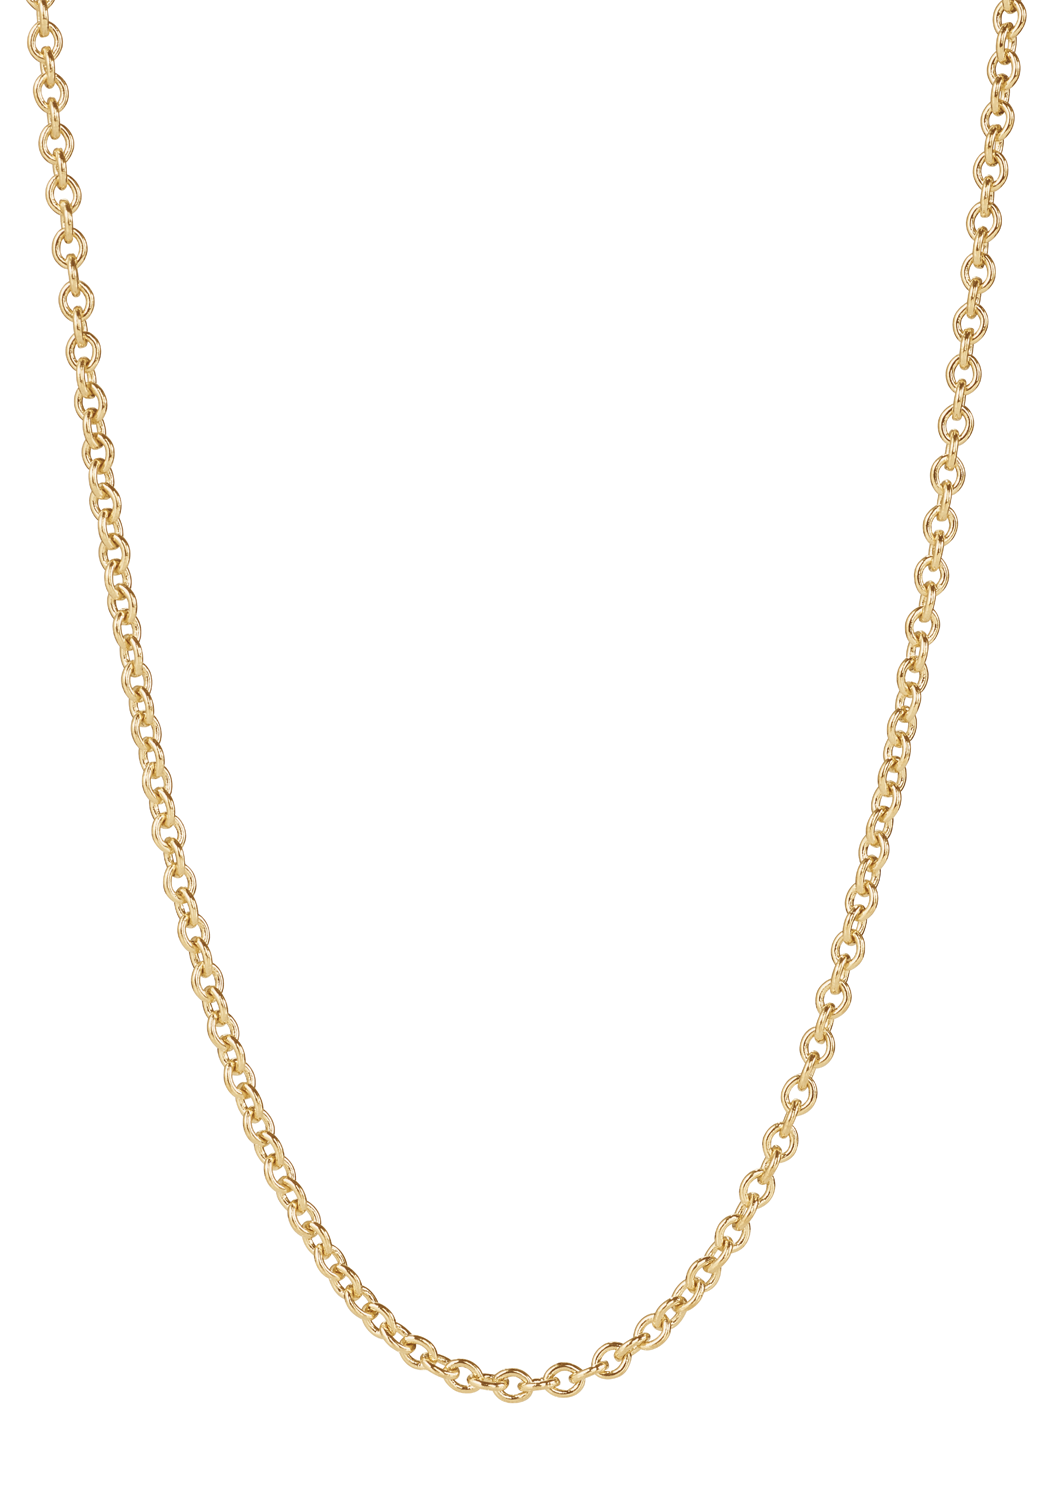 OLE LYNGGAARD My Little World Collier 18KYG Gold Chain | Ref. C2017-402 | OsterJewelers.com